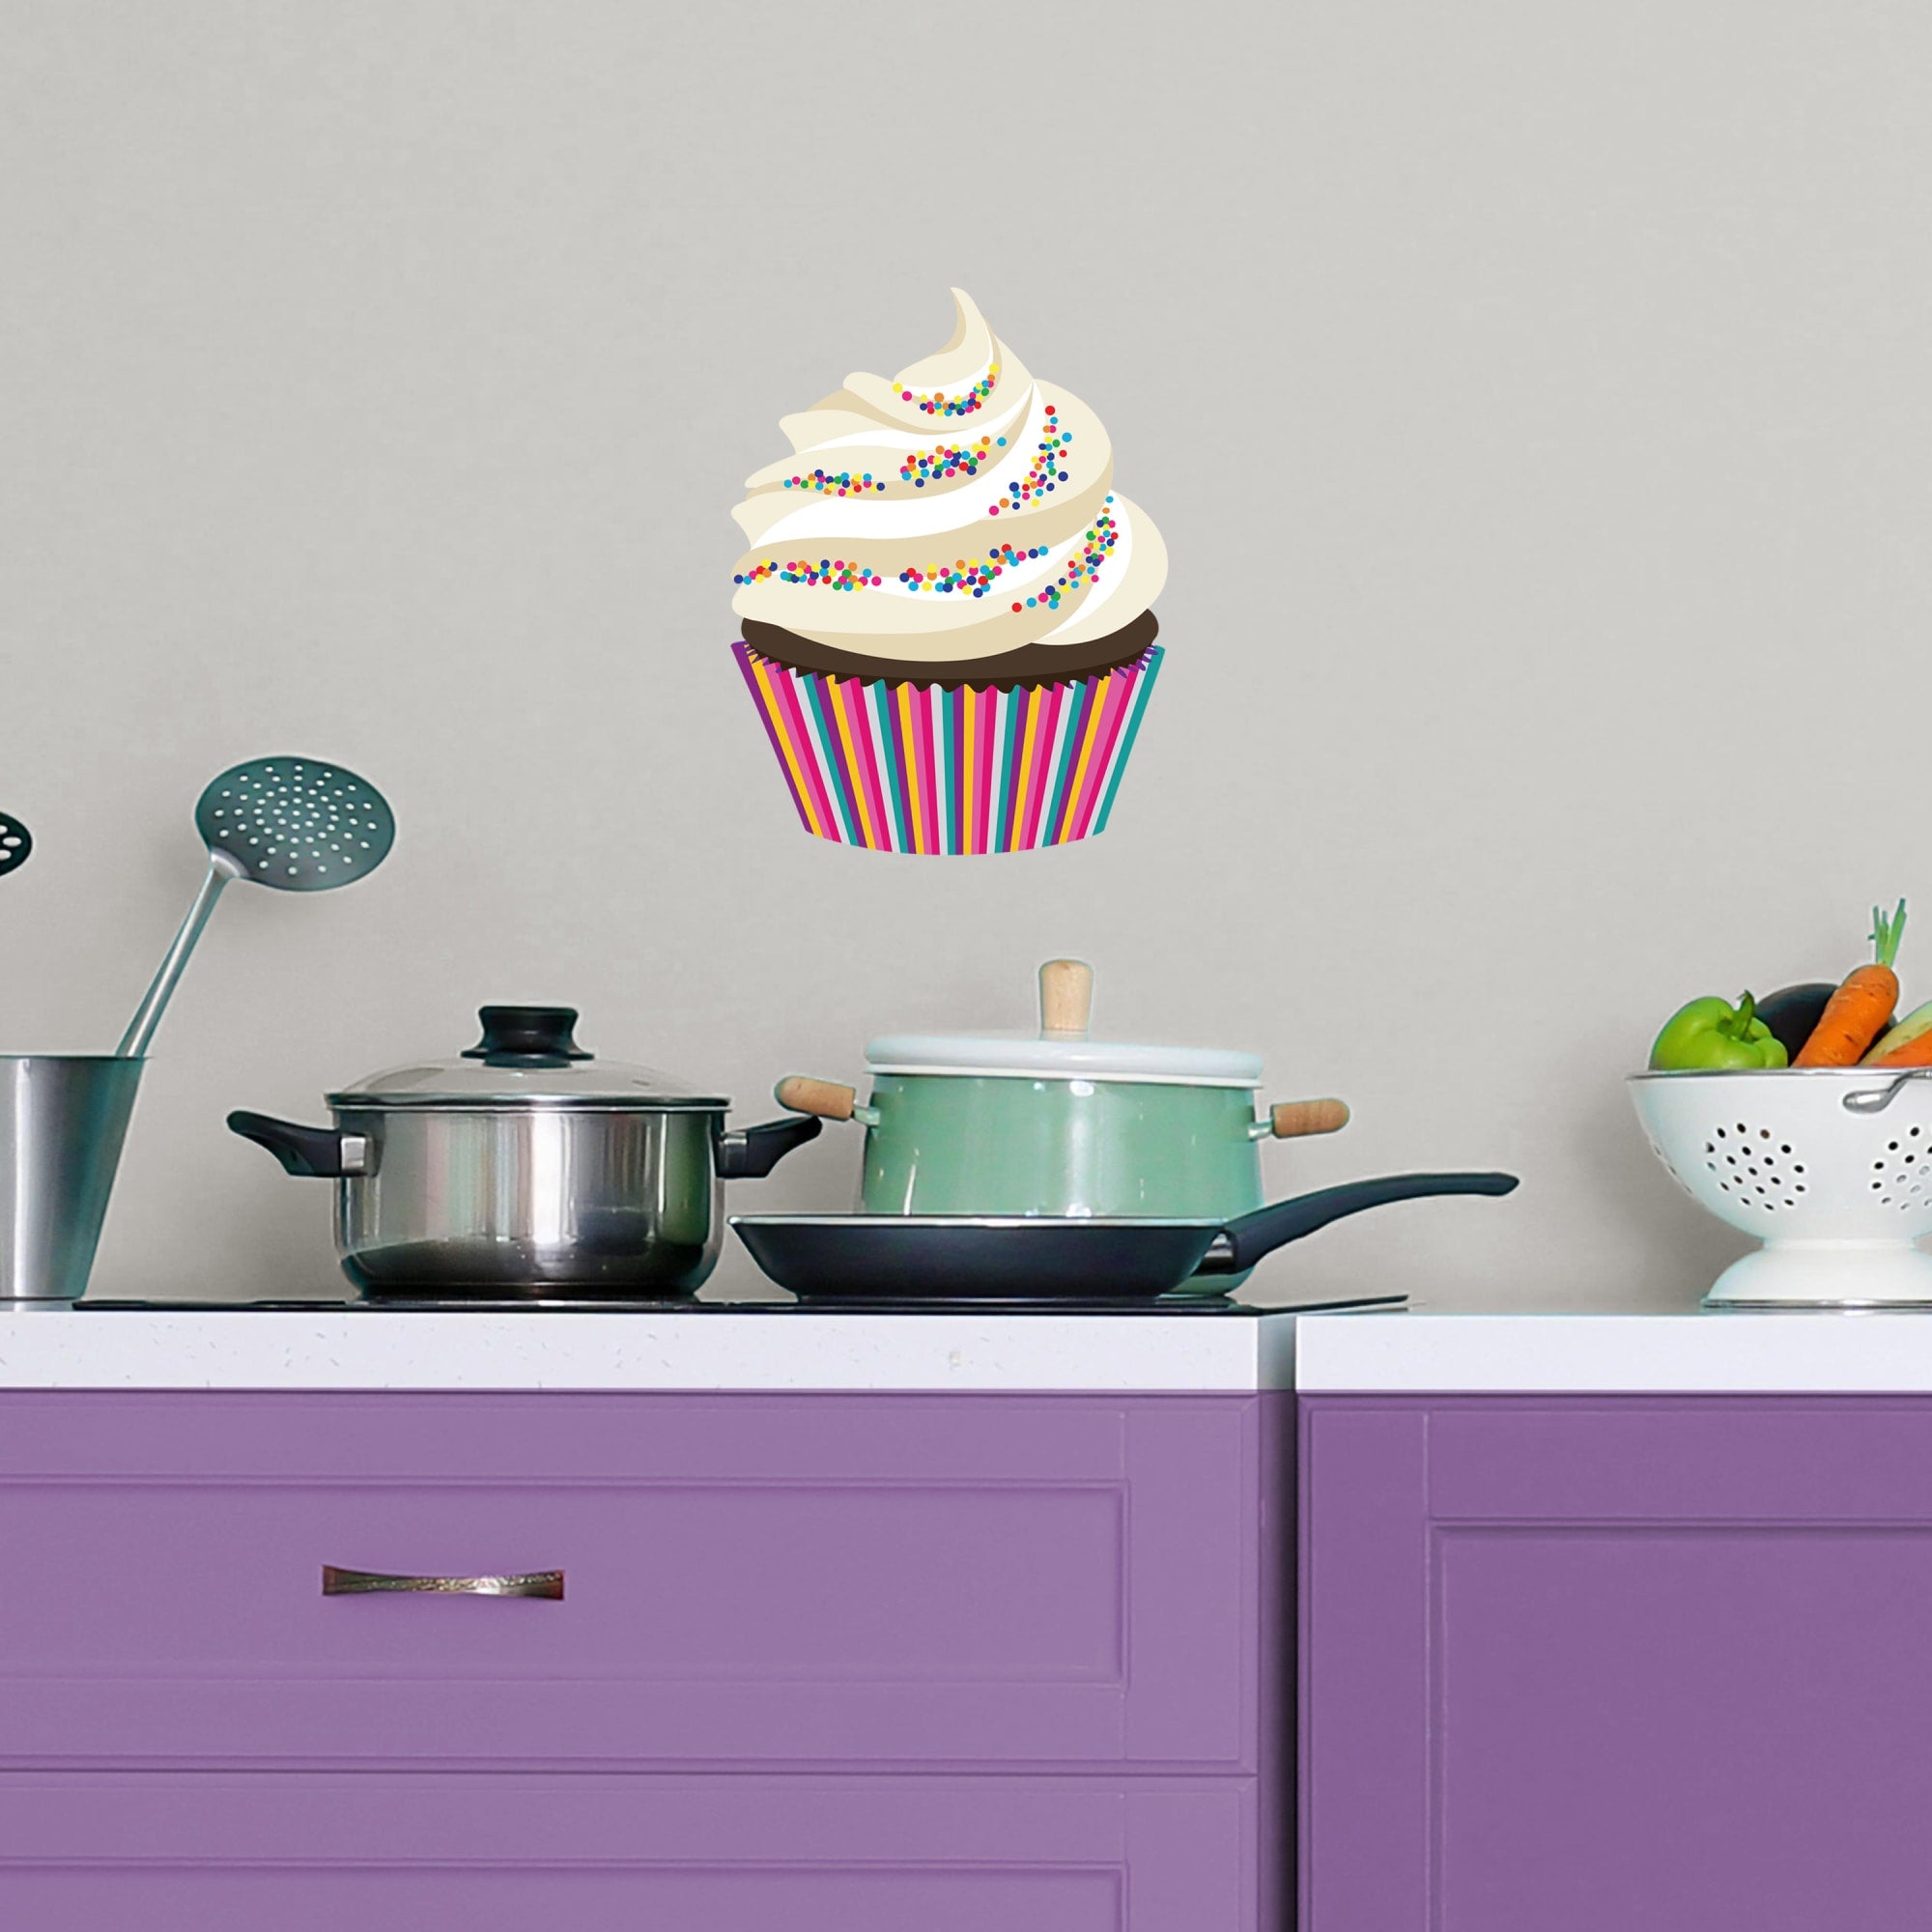 Cupcake: Illustrated - Removable Vinyl Decal Large by Fathead